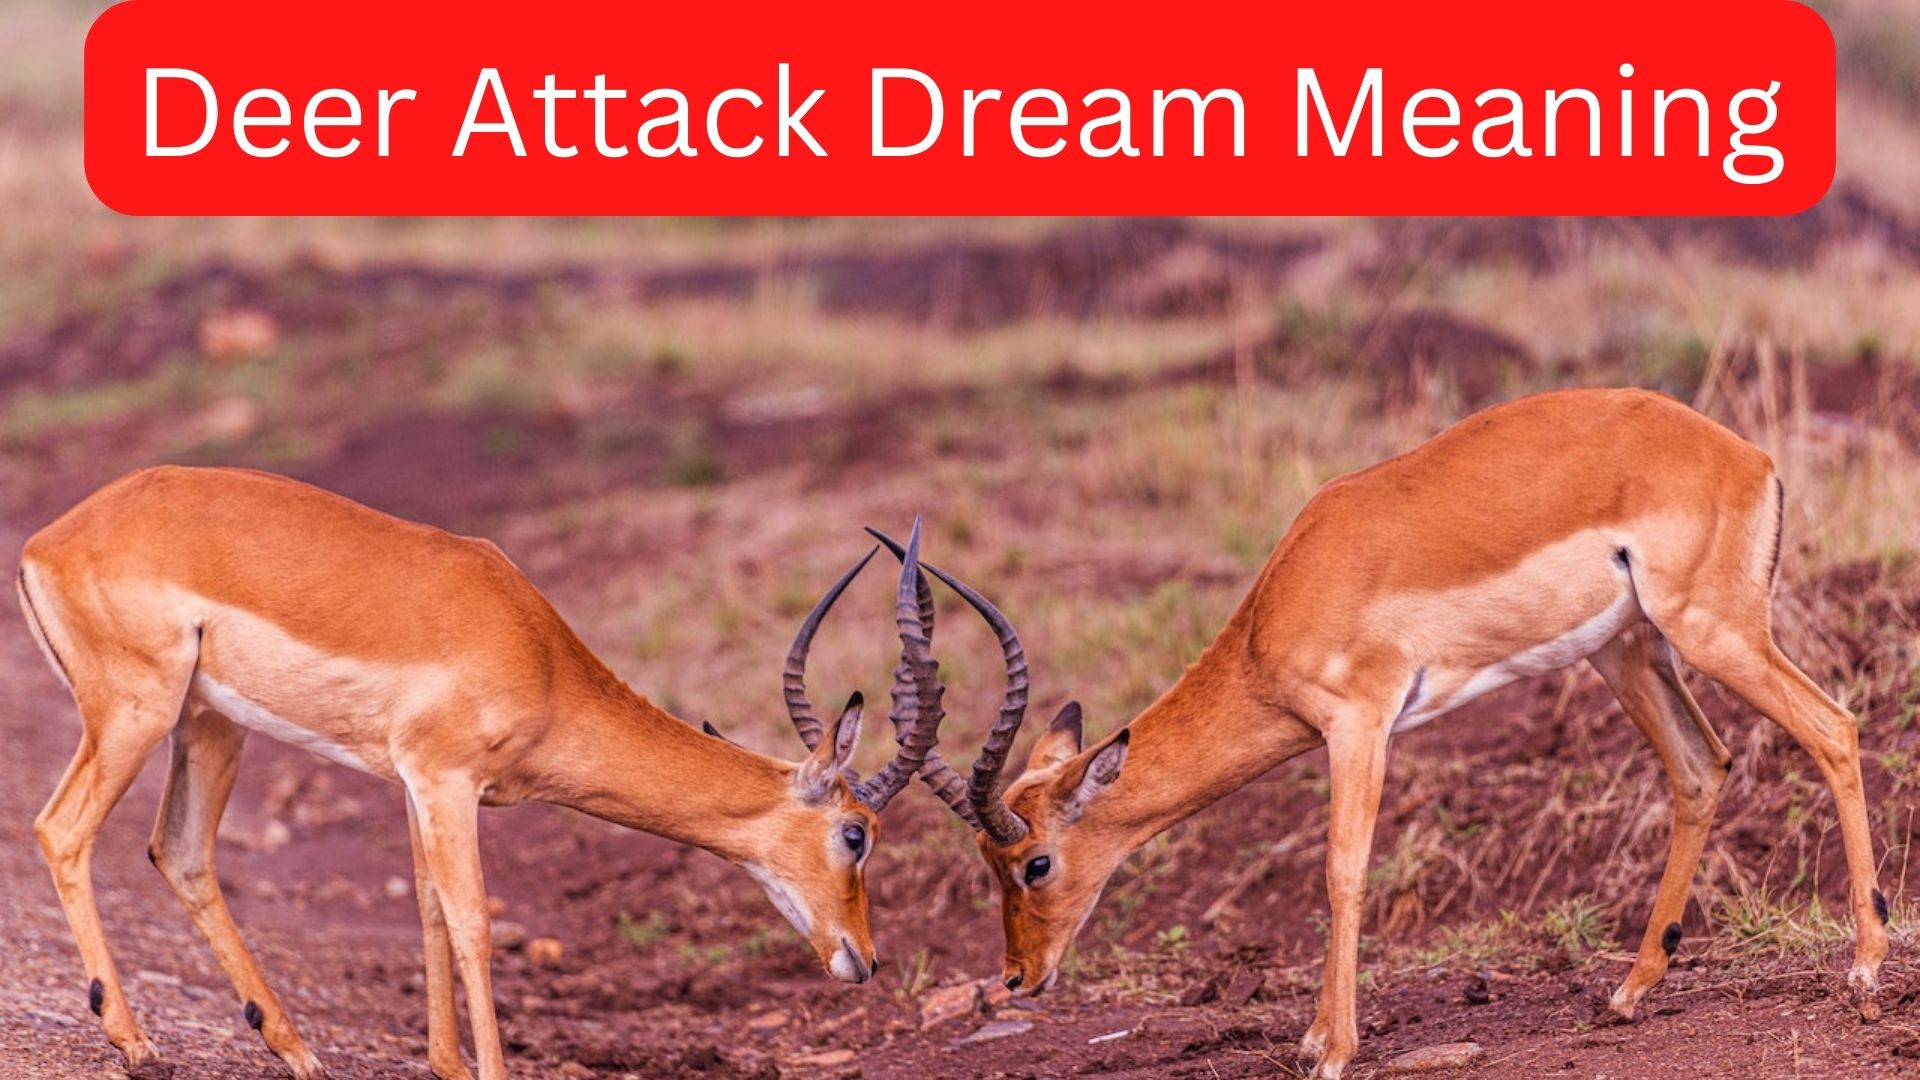 Deer Attack Dream Meaning Reflects Your Desires, Qualities, And Vulnerabilities